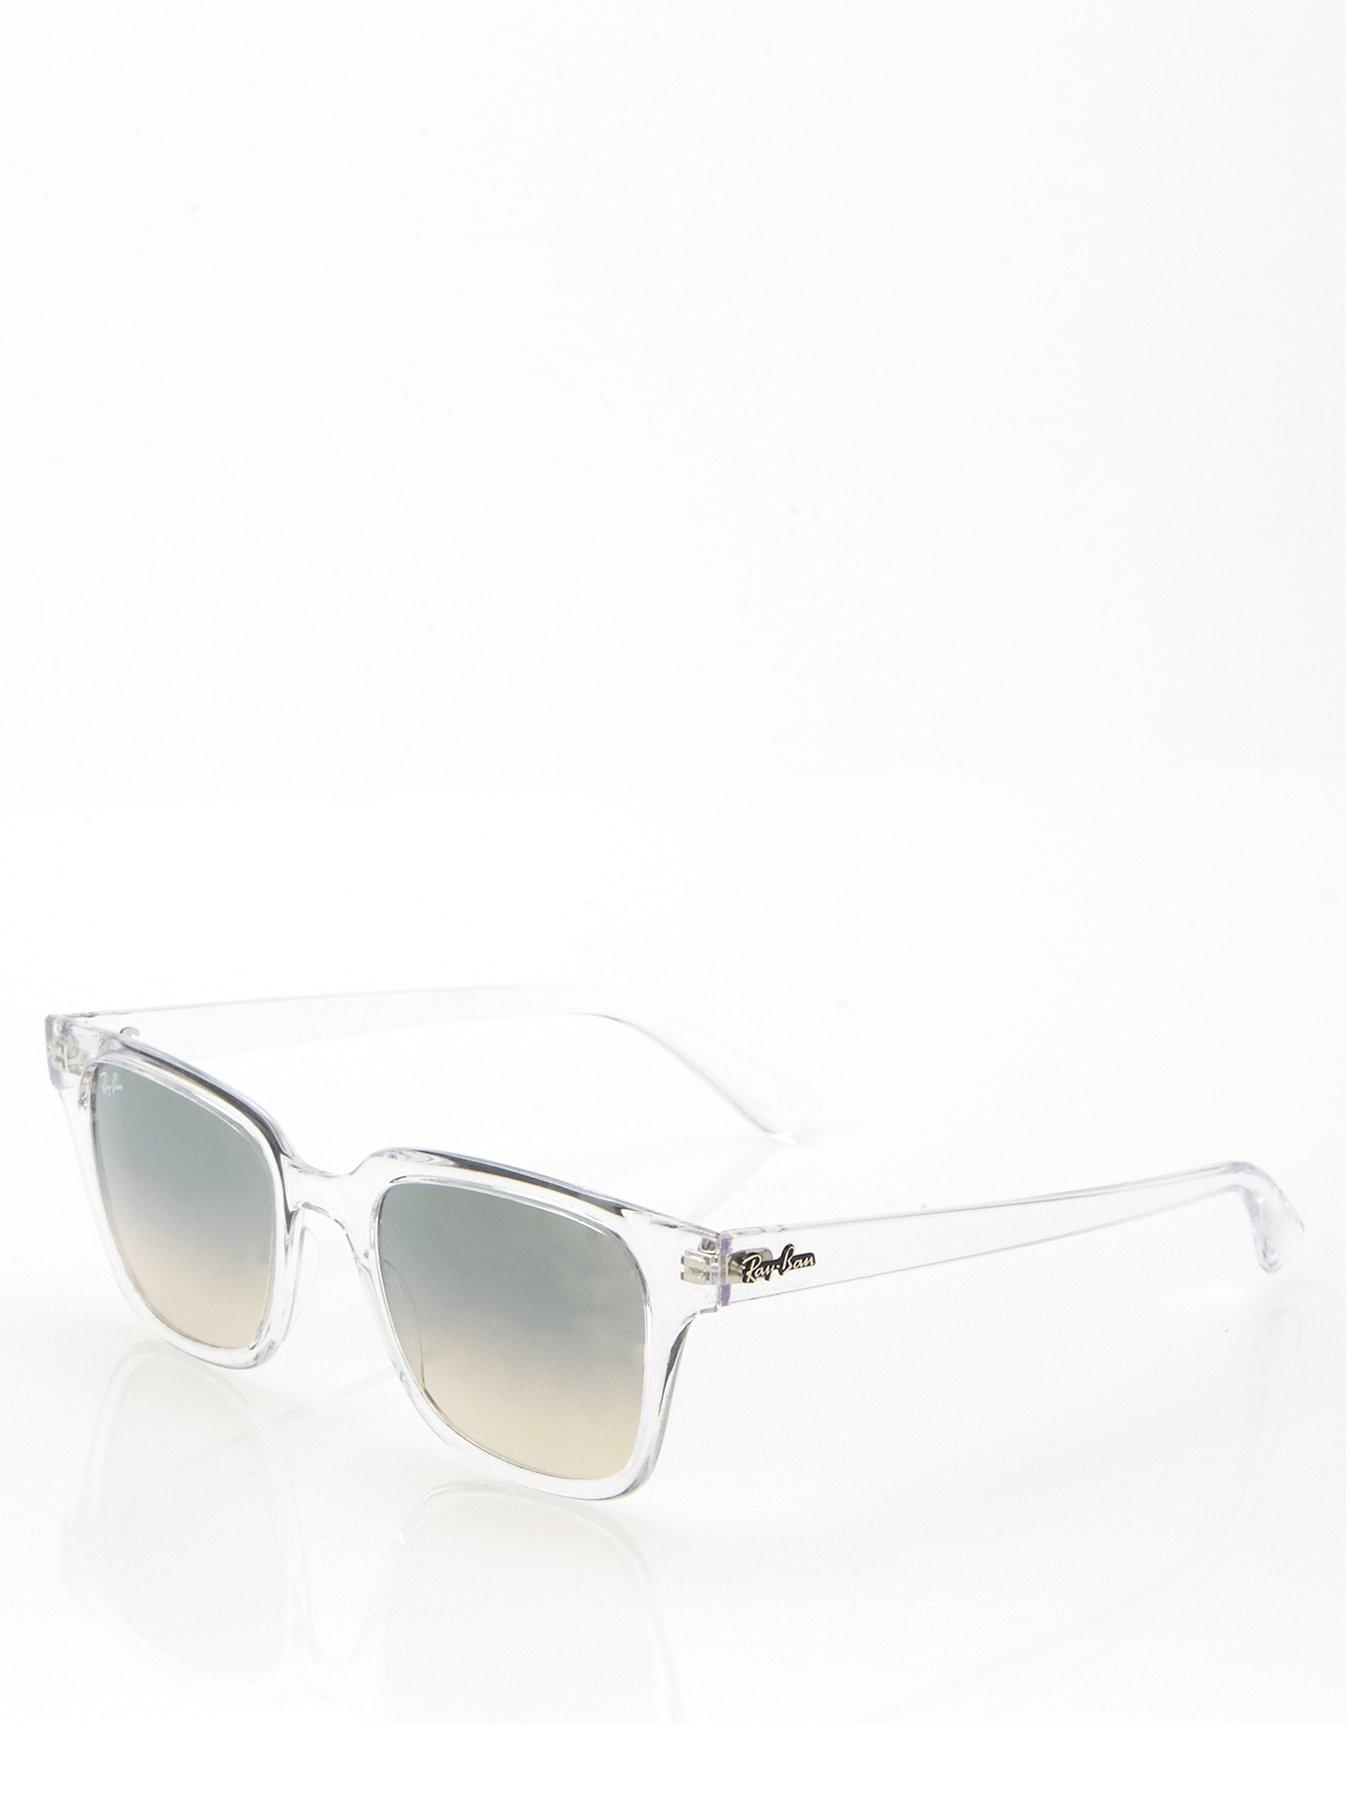  Square Clear Frame Grey Lens Sunglasses - Clear